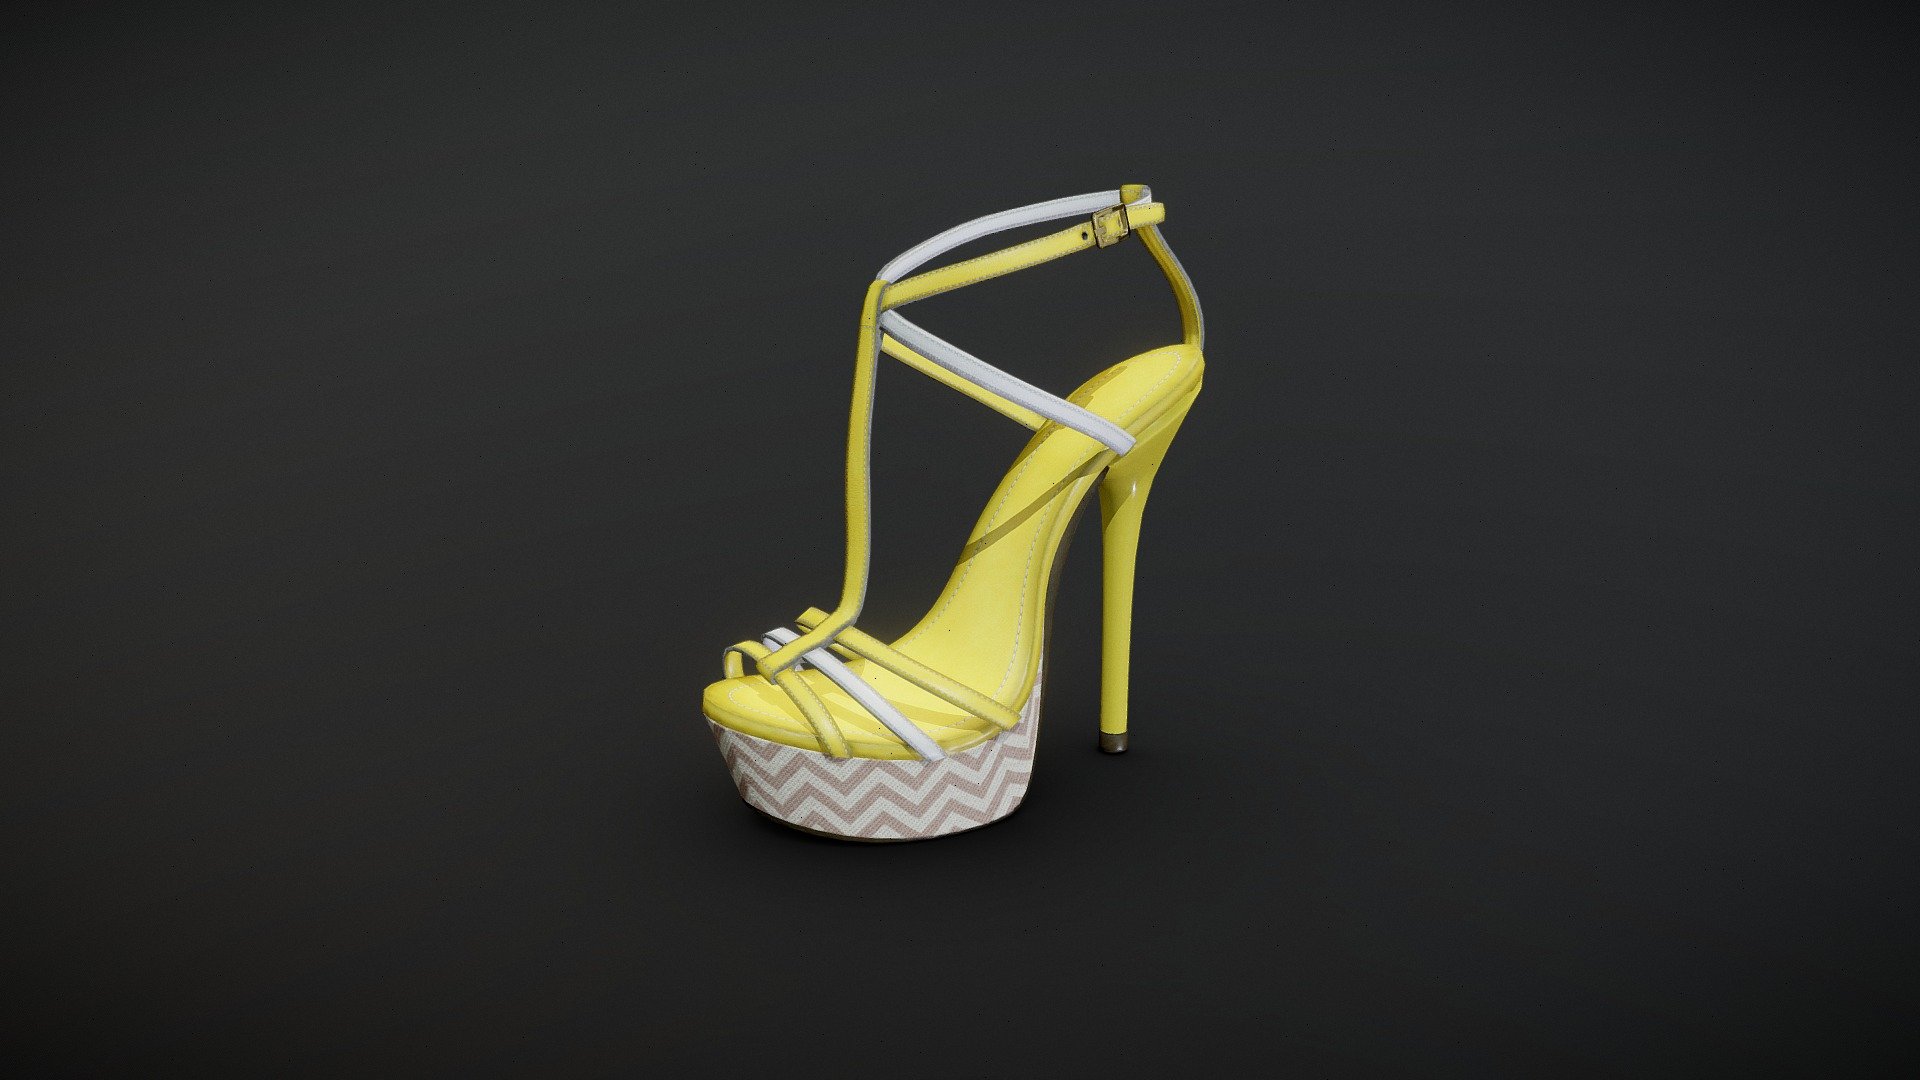 Stilettos High Heel Platform Shoes

Game and production ready, polycount optimized for quality, ideal for high quality Characters and Close-Ups
Internal parts modeled and textured, ideal for customization or animation

Single UV space
PBR and UE4 4k Textures
Low Poly has 2.6k quads
FBX, OBJ, ZTL - Stilettos High Heel Platform Shoes - Buy Royalty Free 3D model by Feds452 3d model